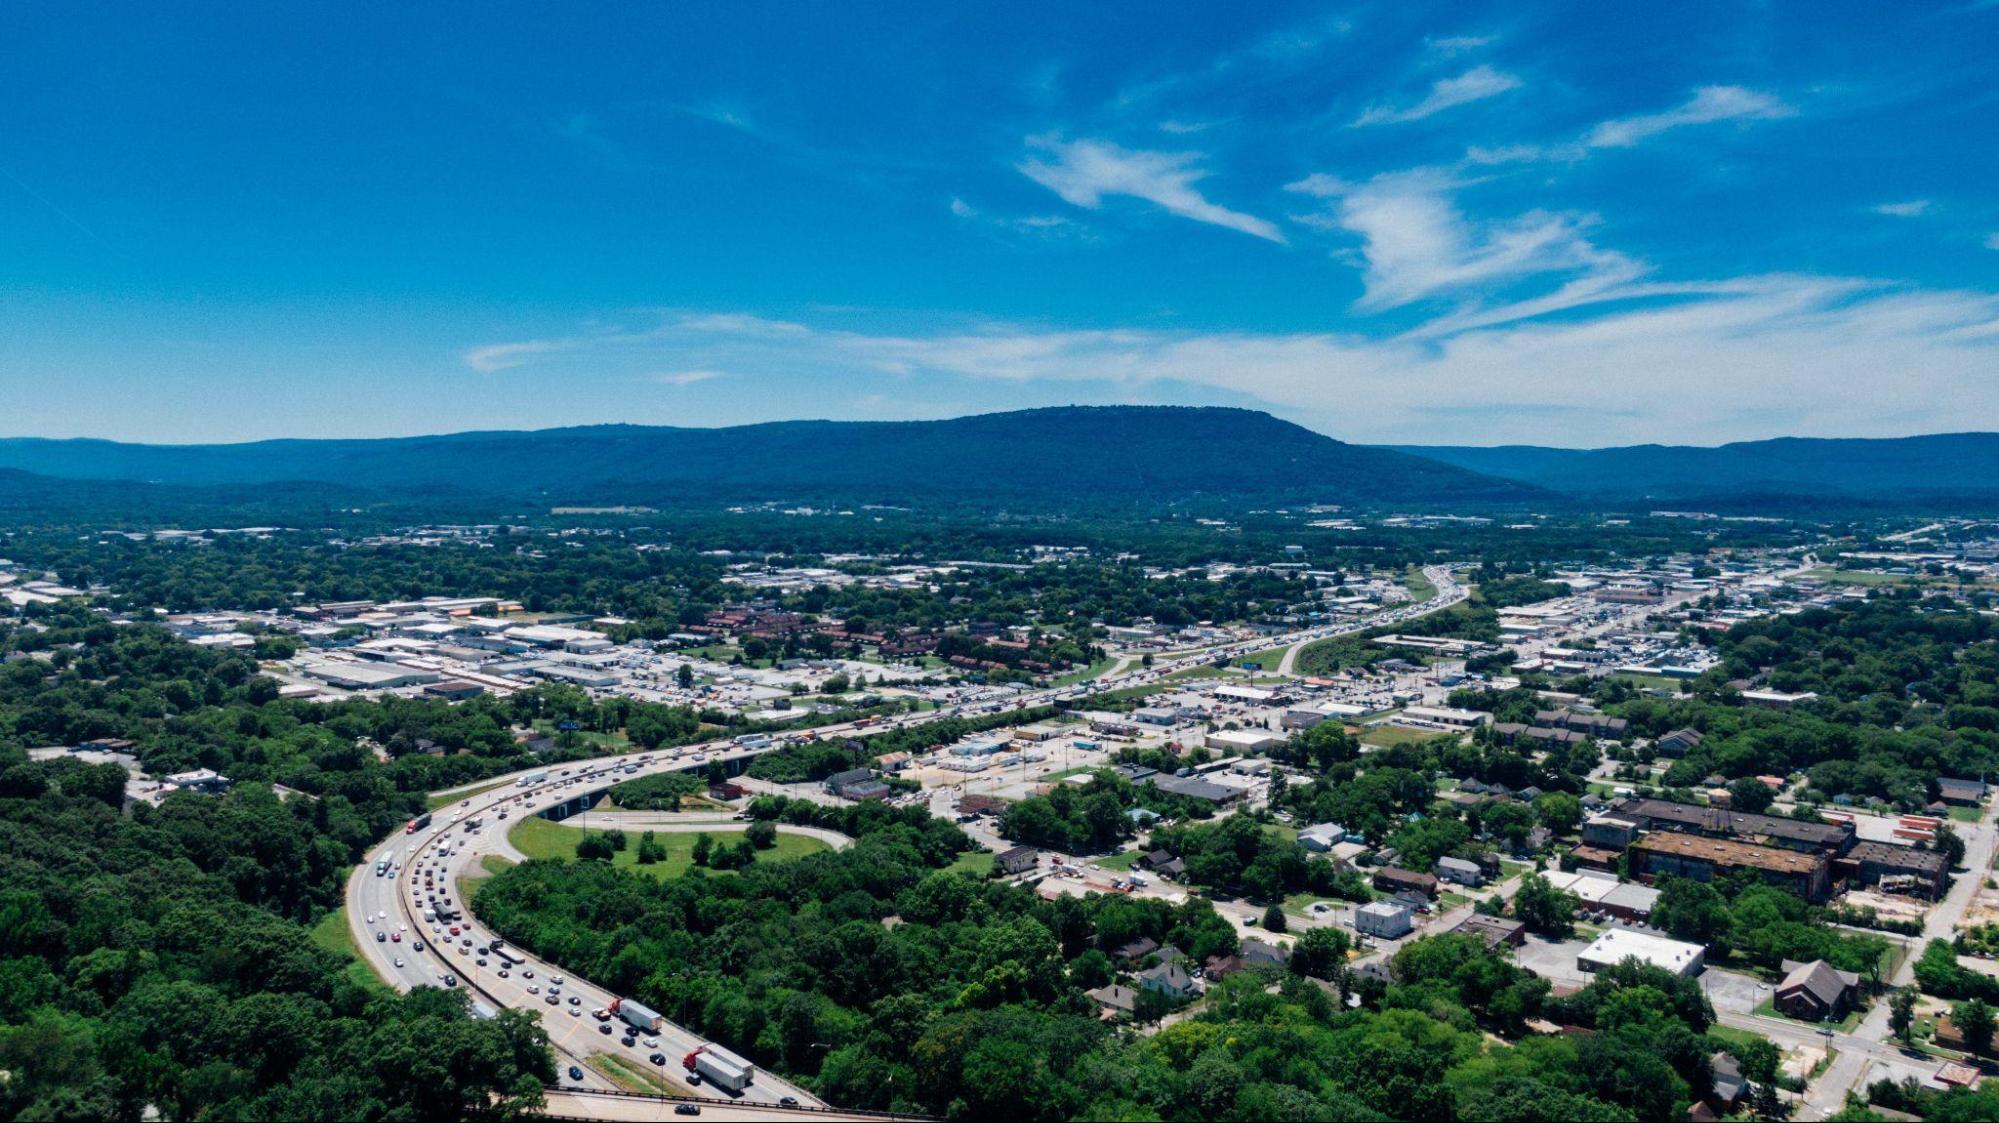 An aerial view of neighborhoods and mountains in Franklin.